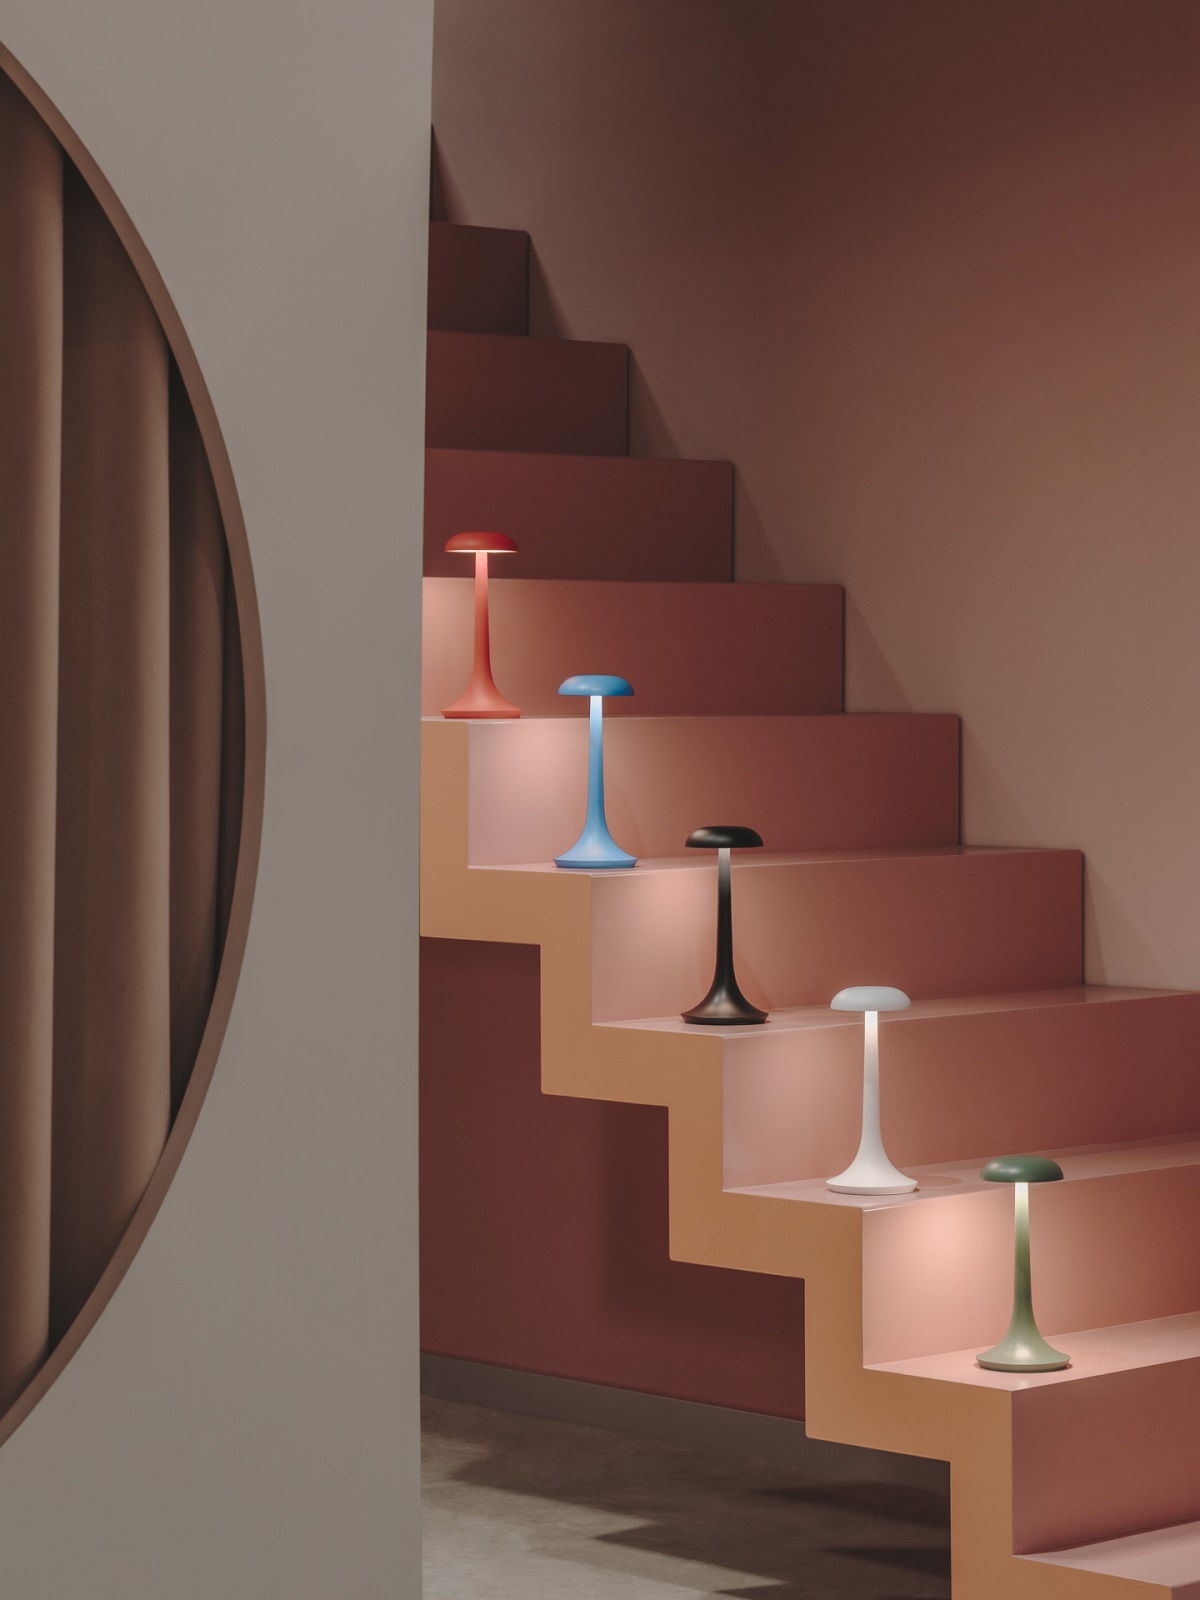 Lamps on stairs